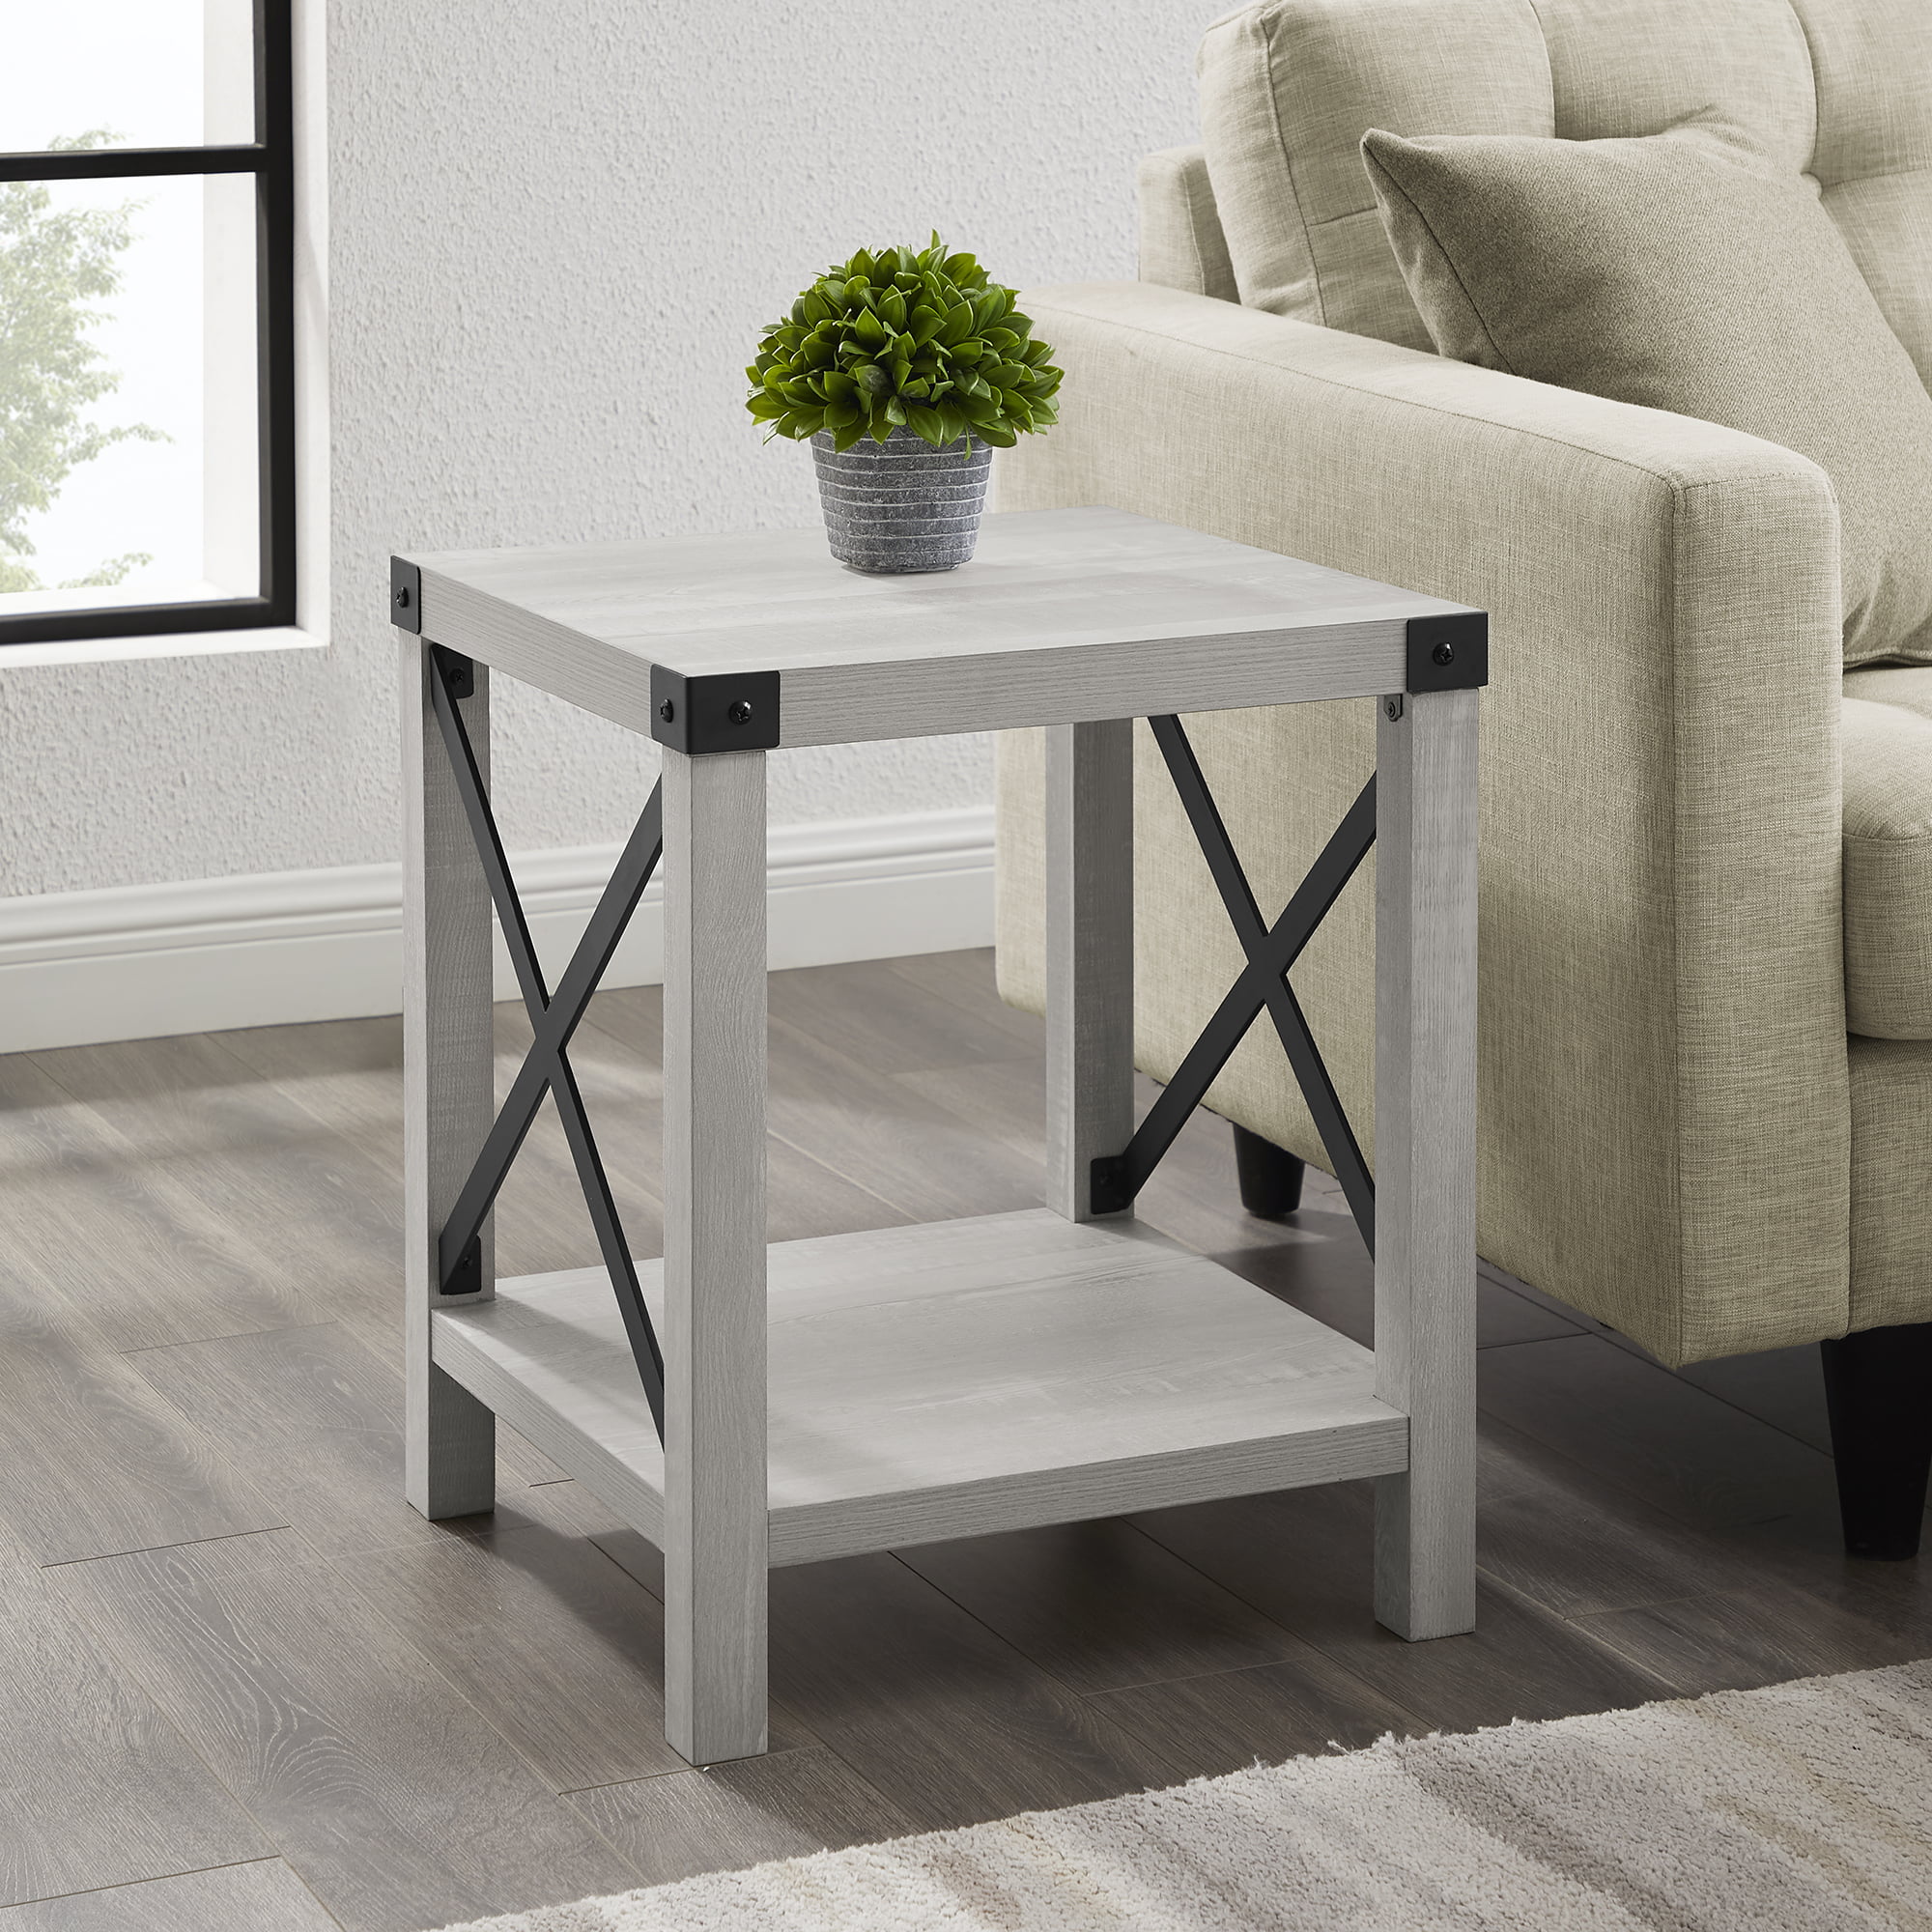 Featured image of post Grey End Tables For Living Room / Browse a large selection of rustic end table and side table designs in a variety of styles, sizes and finishes to accent your living room or bedroom.